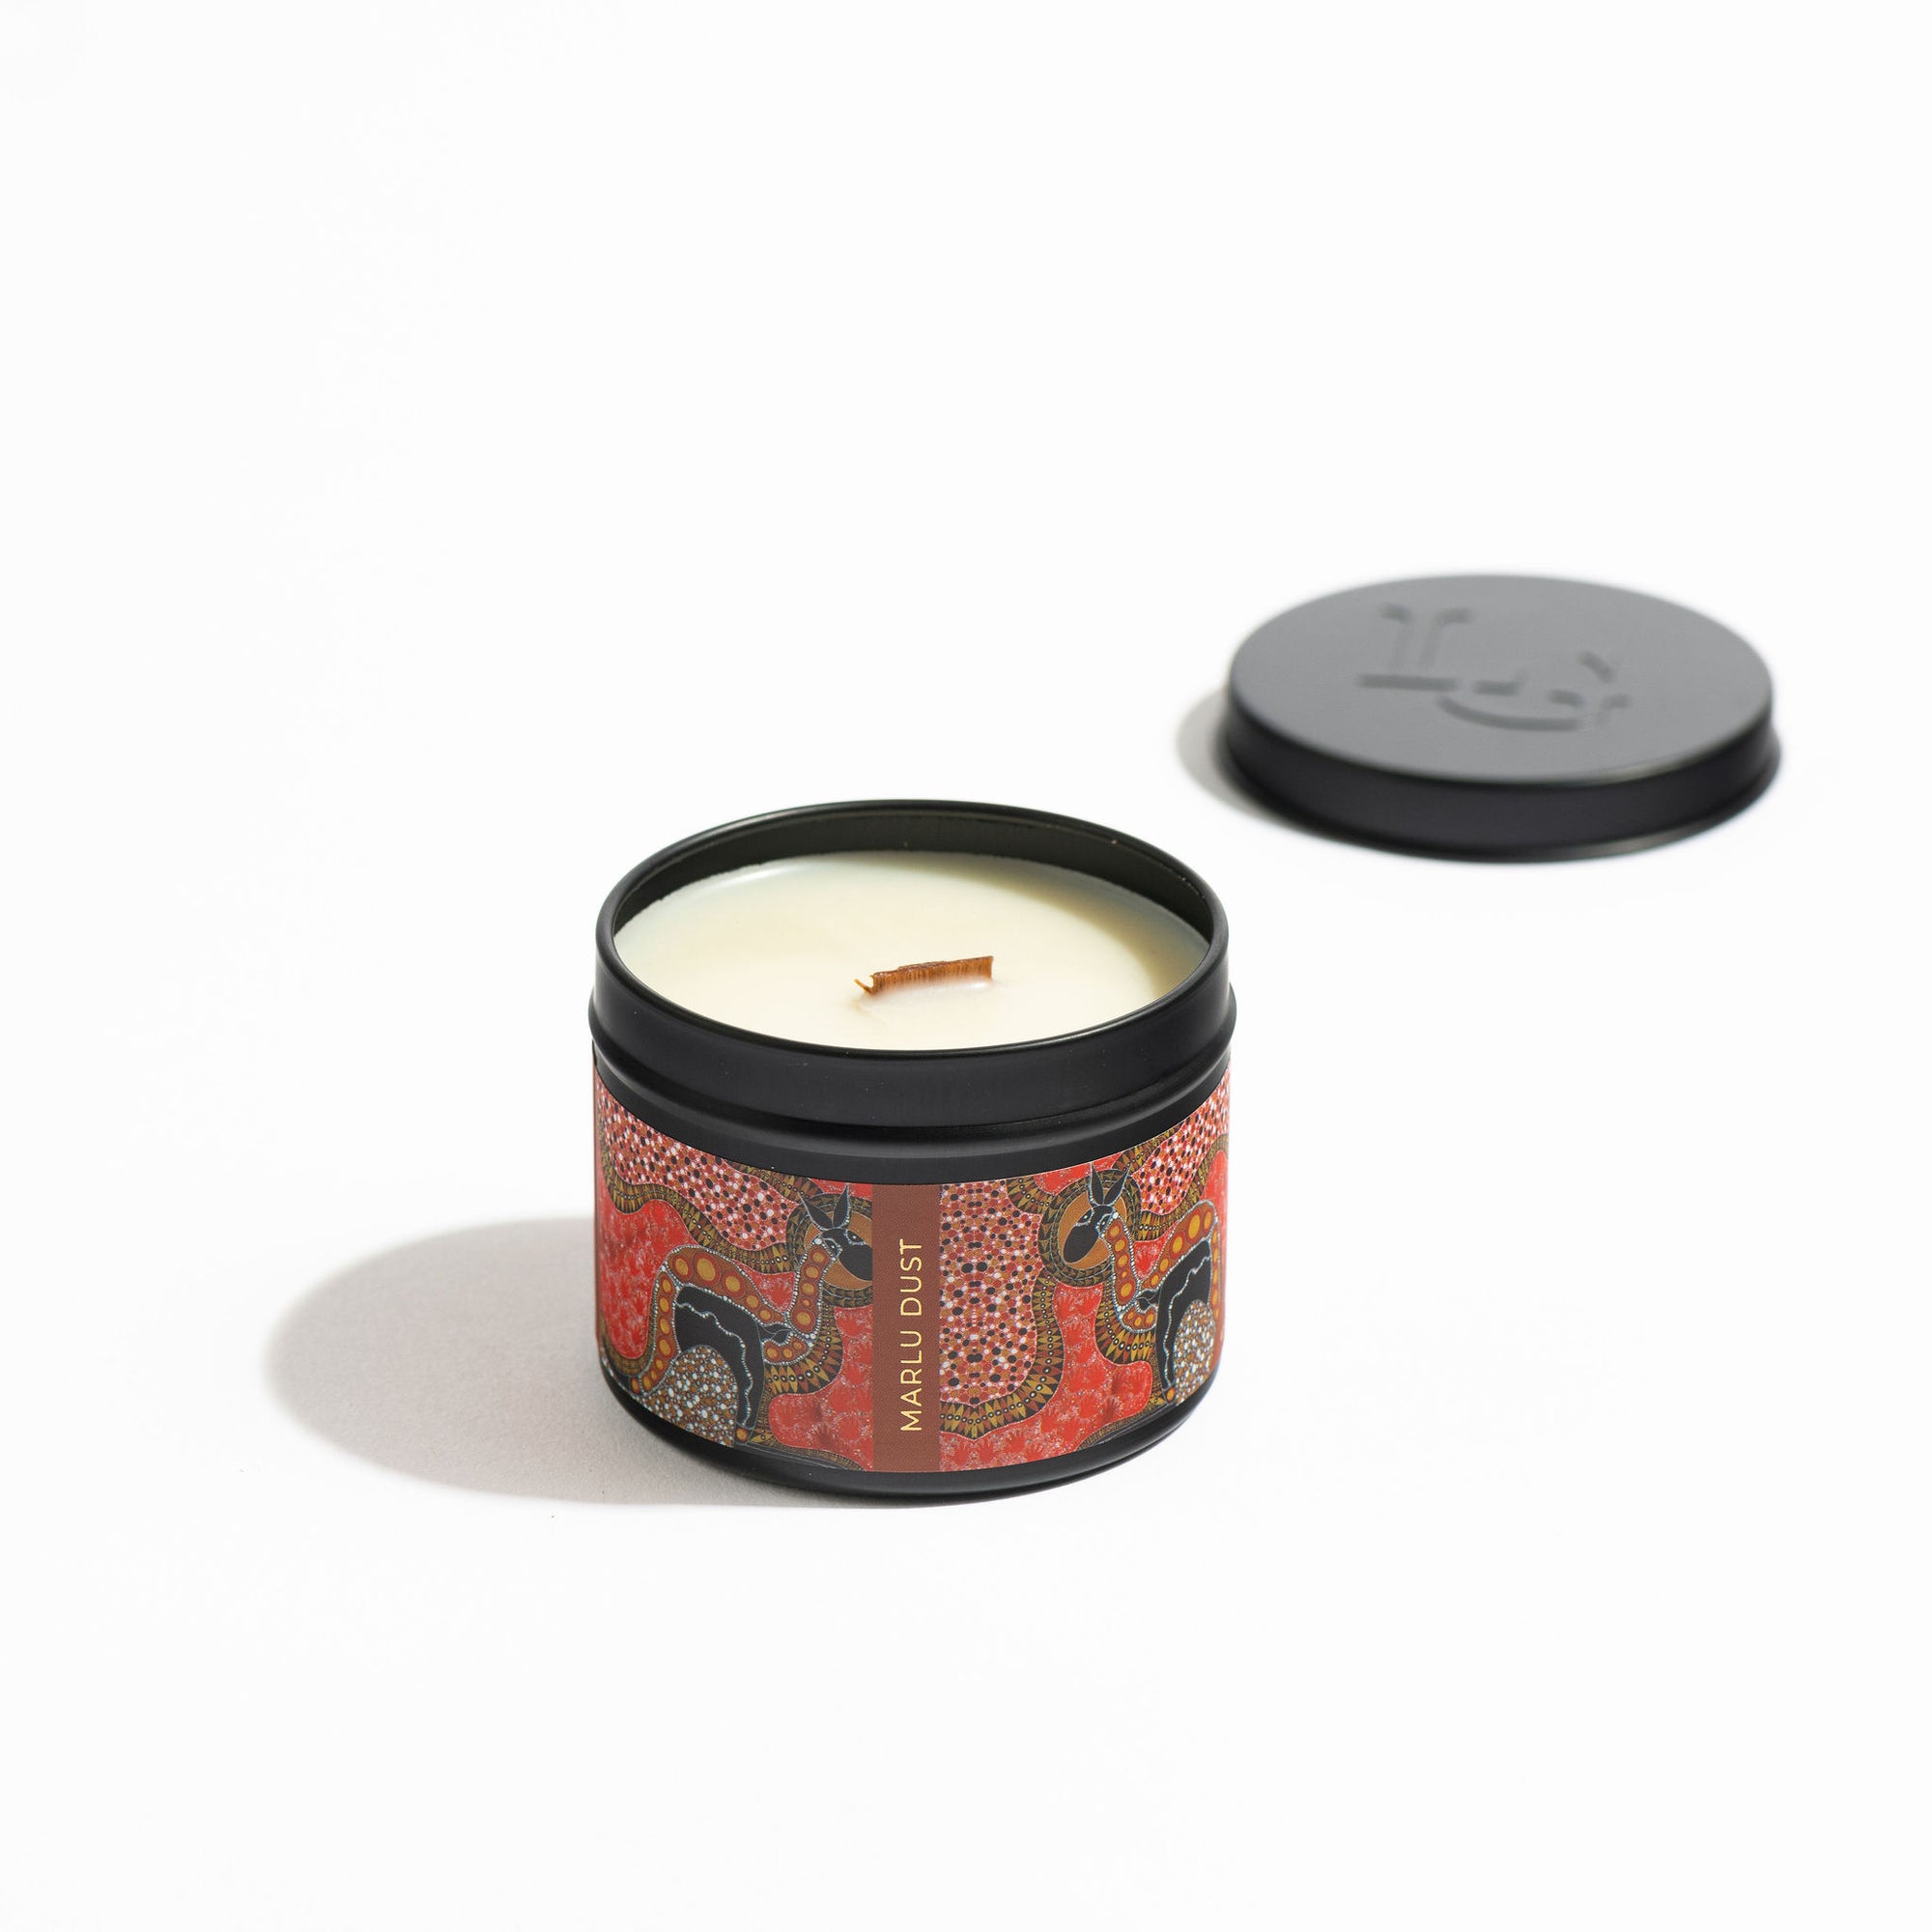 Soul Australiana Travel Candle - Marlu Dust | Luxury Candles & Home Fragrances by Light + Glo